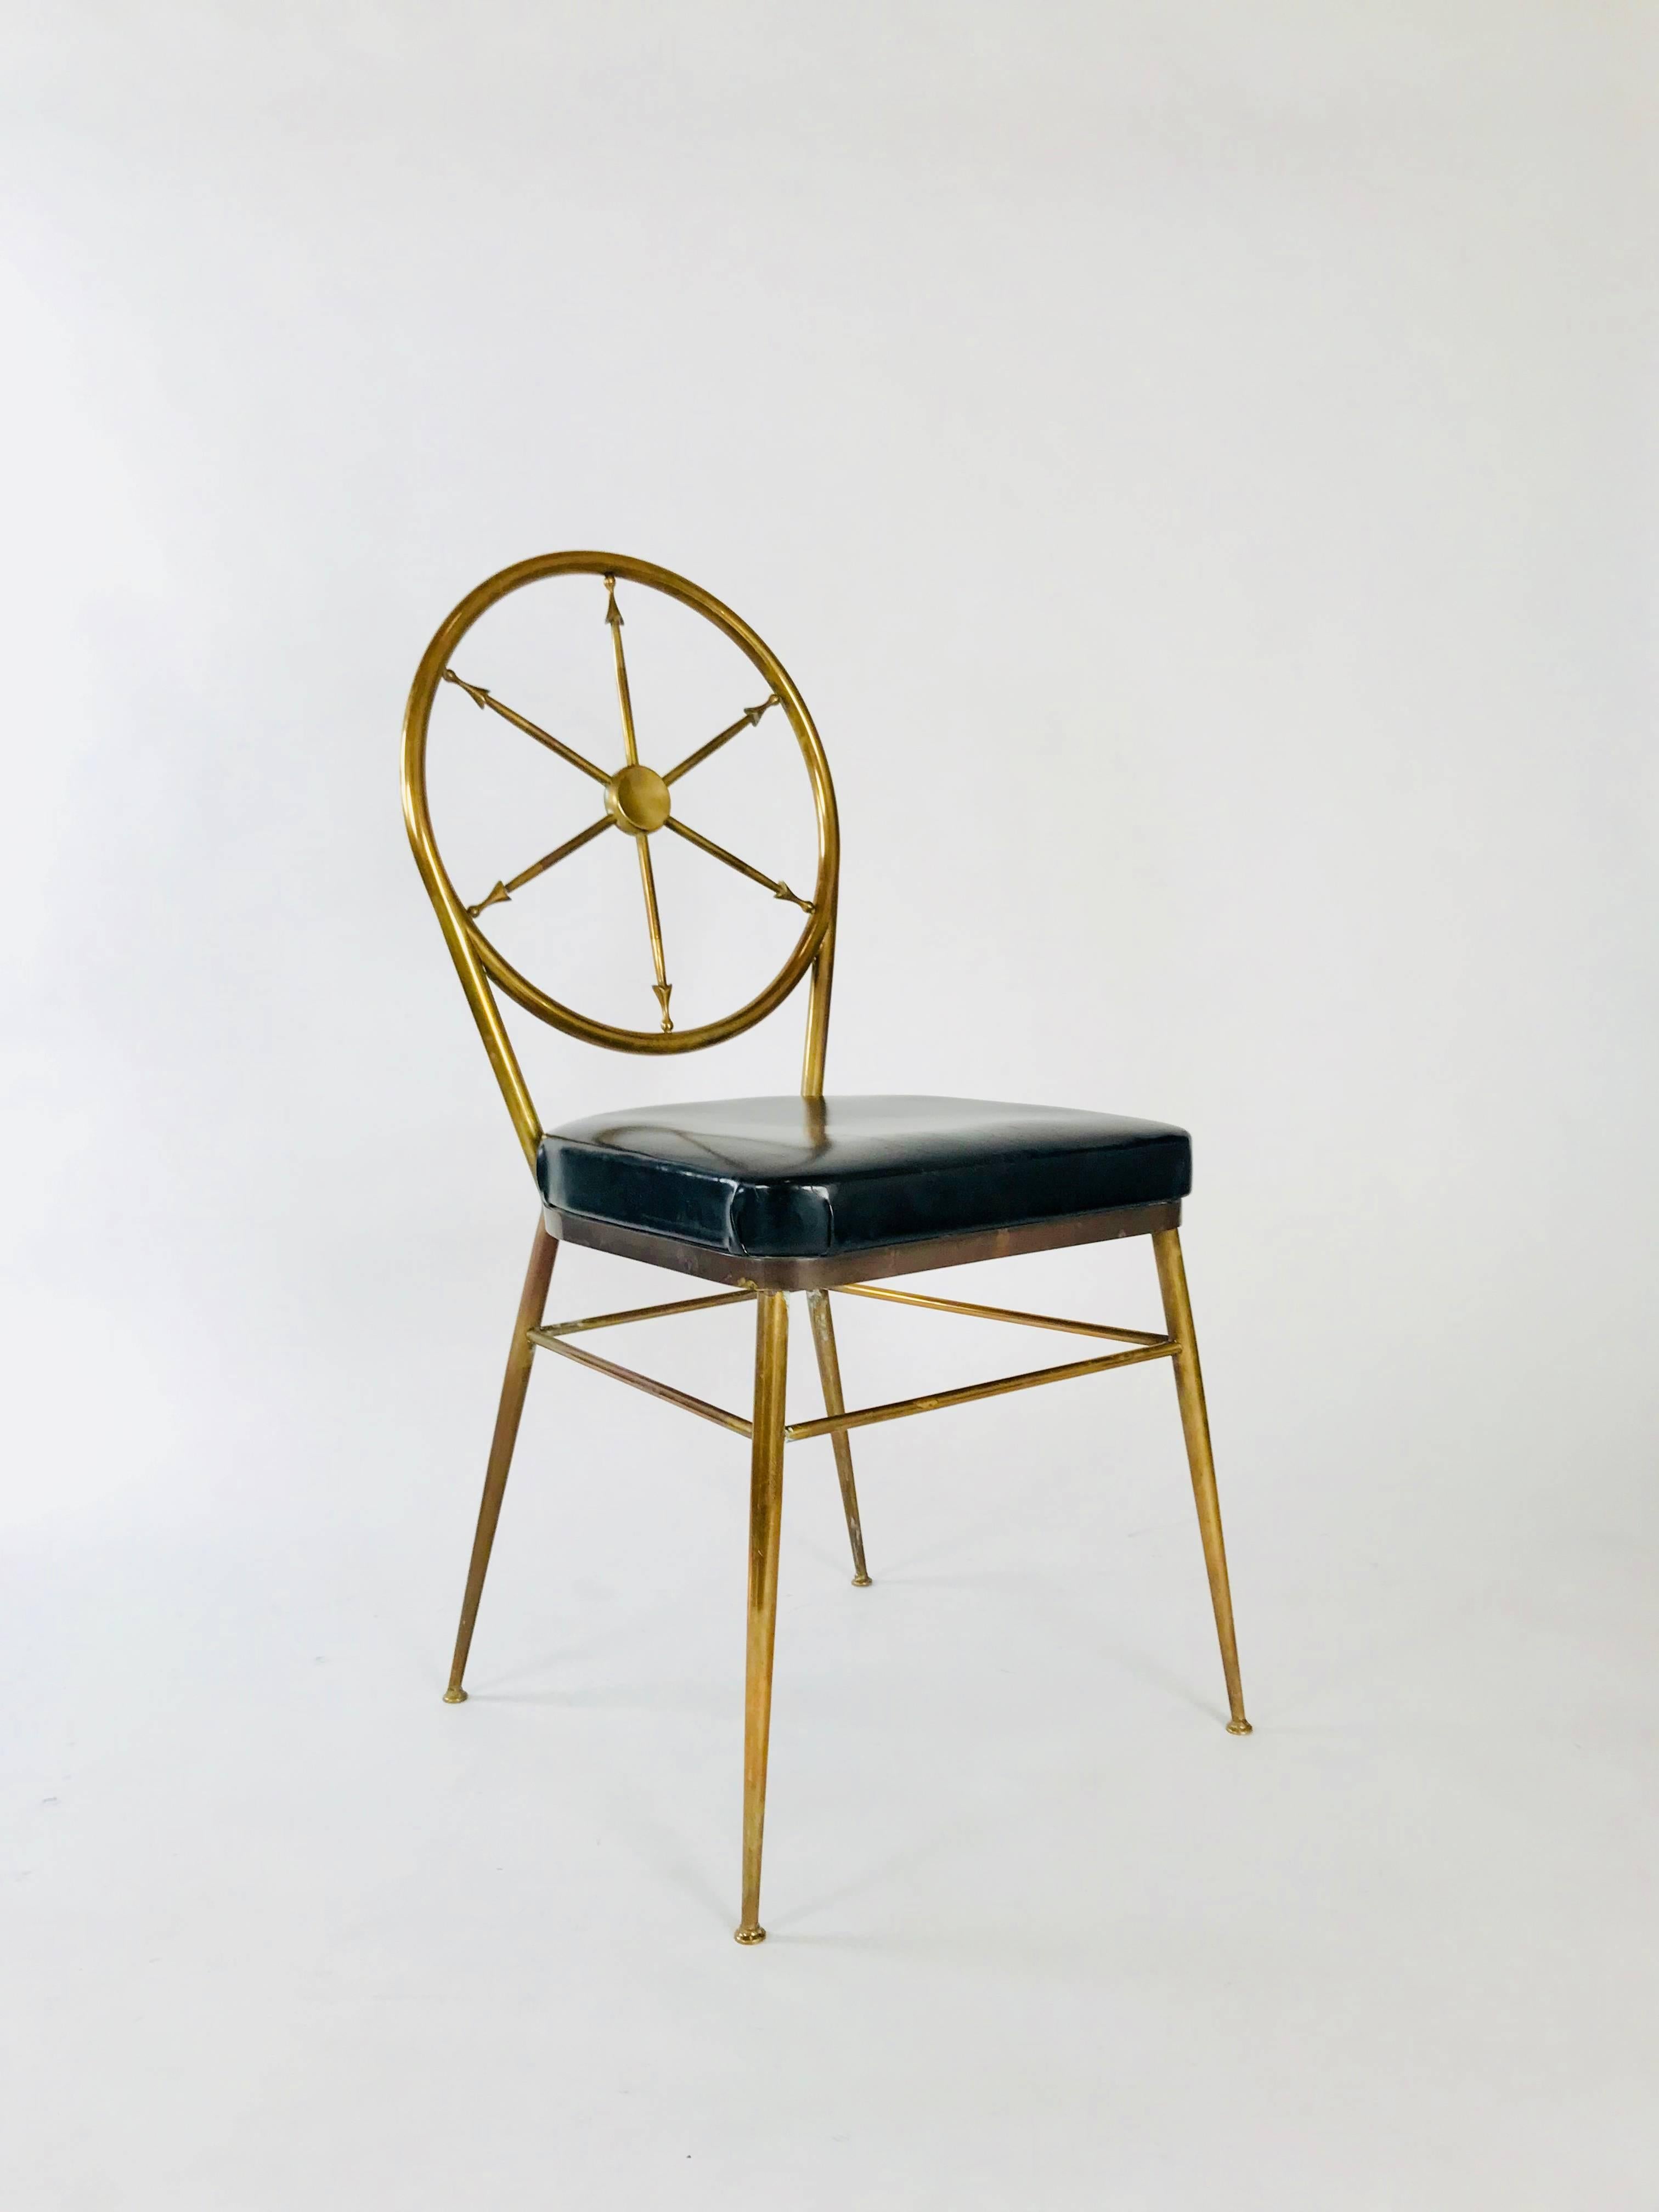 Brass compass back chair attributed to Gio Ponti. Original black patent leather seat and a lovely patina to the heavy brass frame.